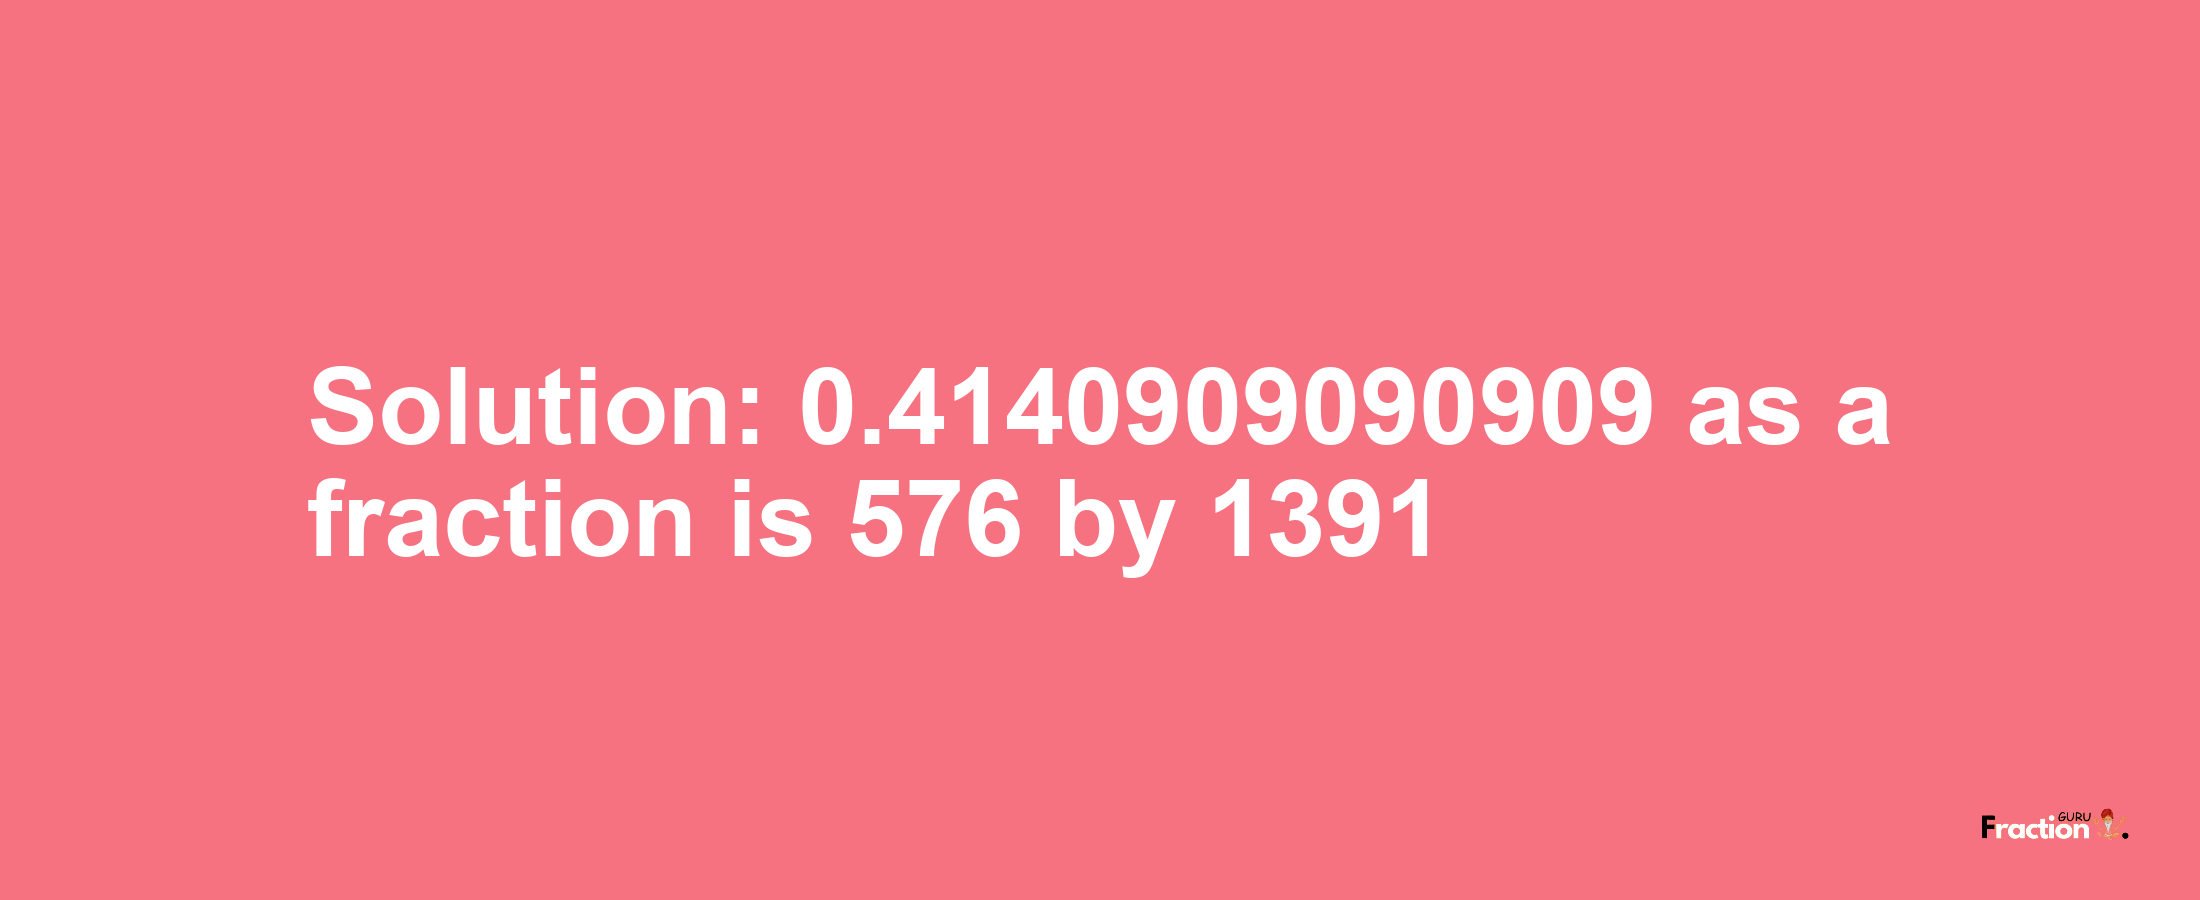 Solution:0.4140909090909 as a fraction is 576/1391